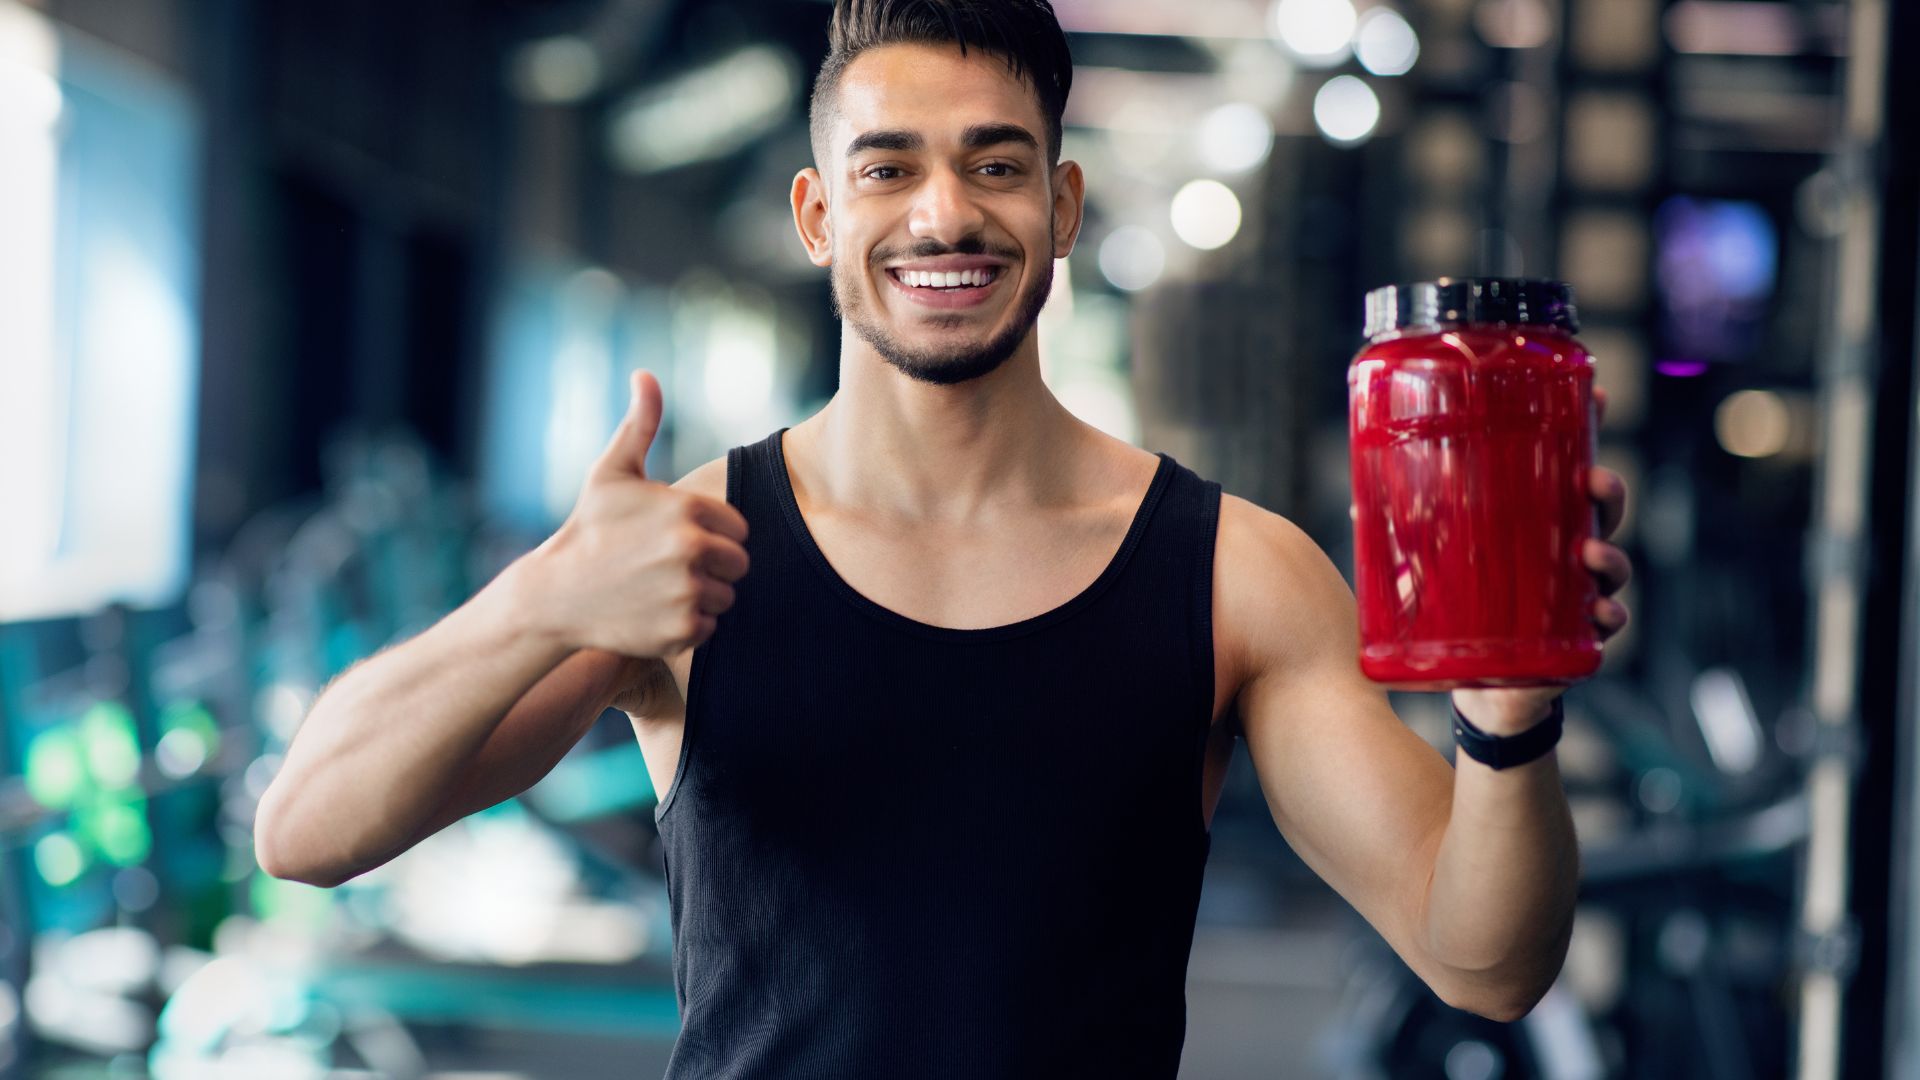 Workout Supplements. Handsome Middle Eastern Male Athlete Holding Container with Protein Powder